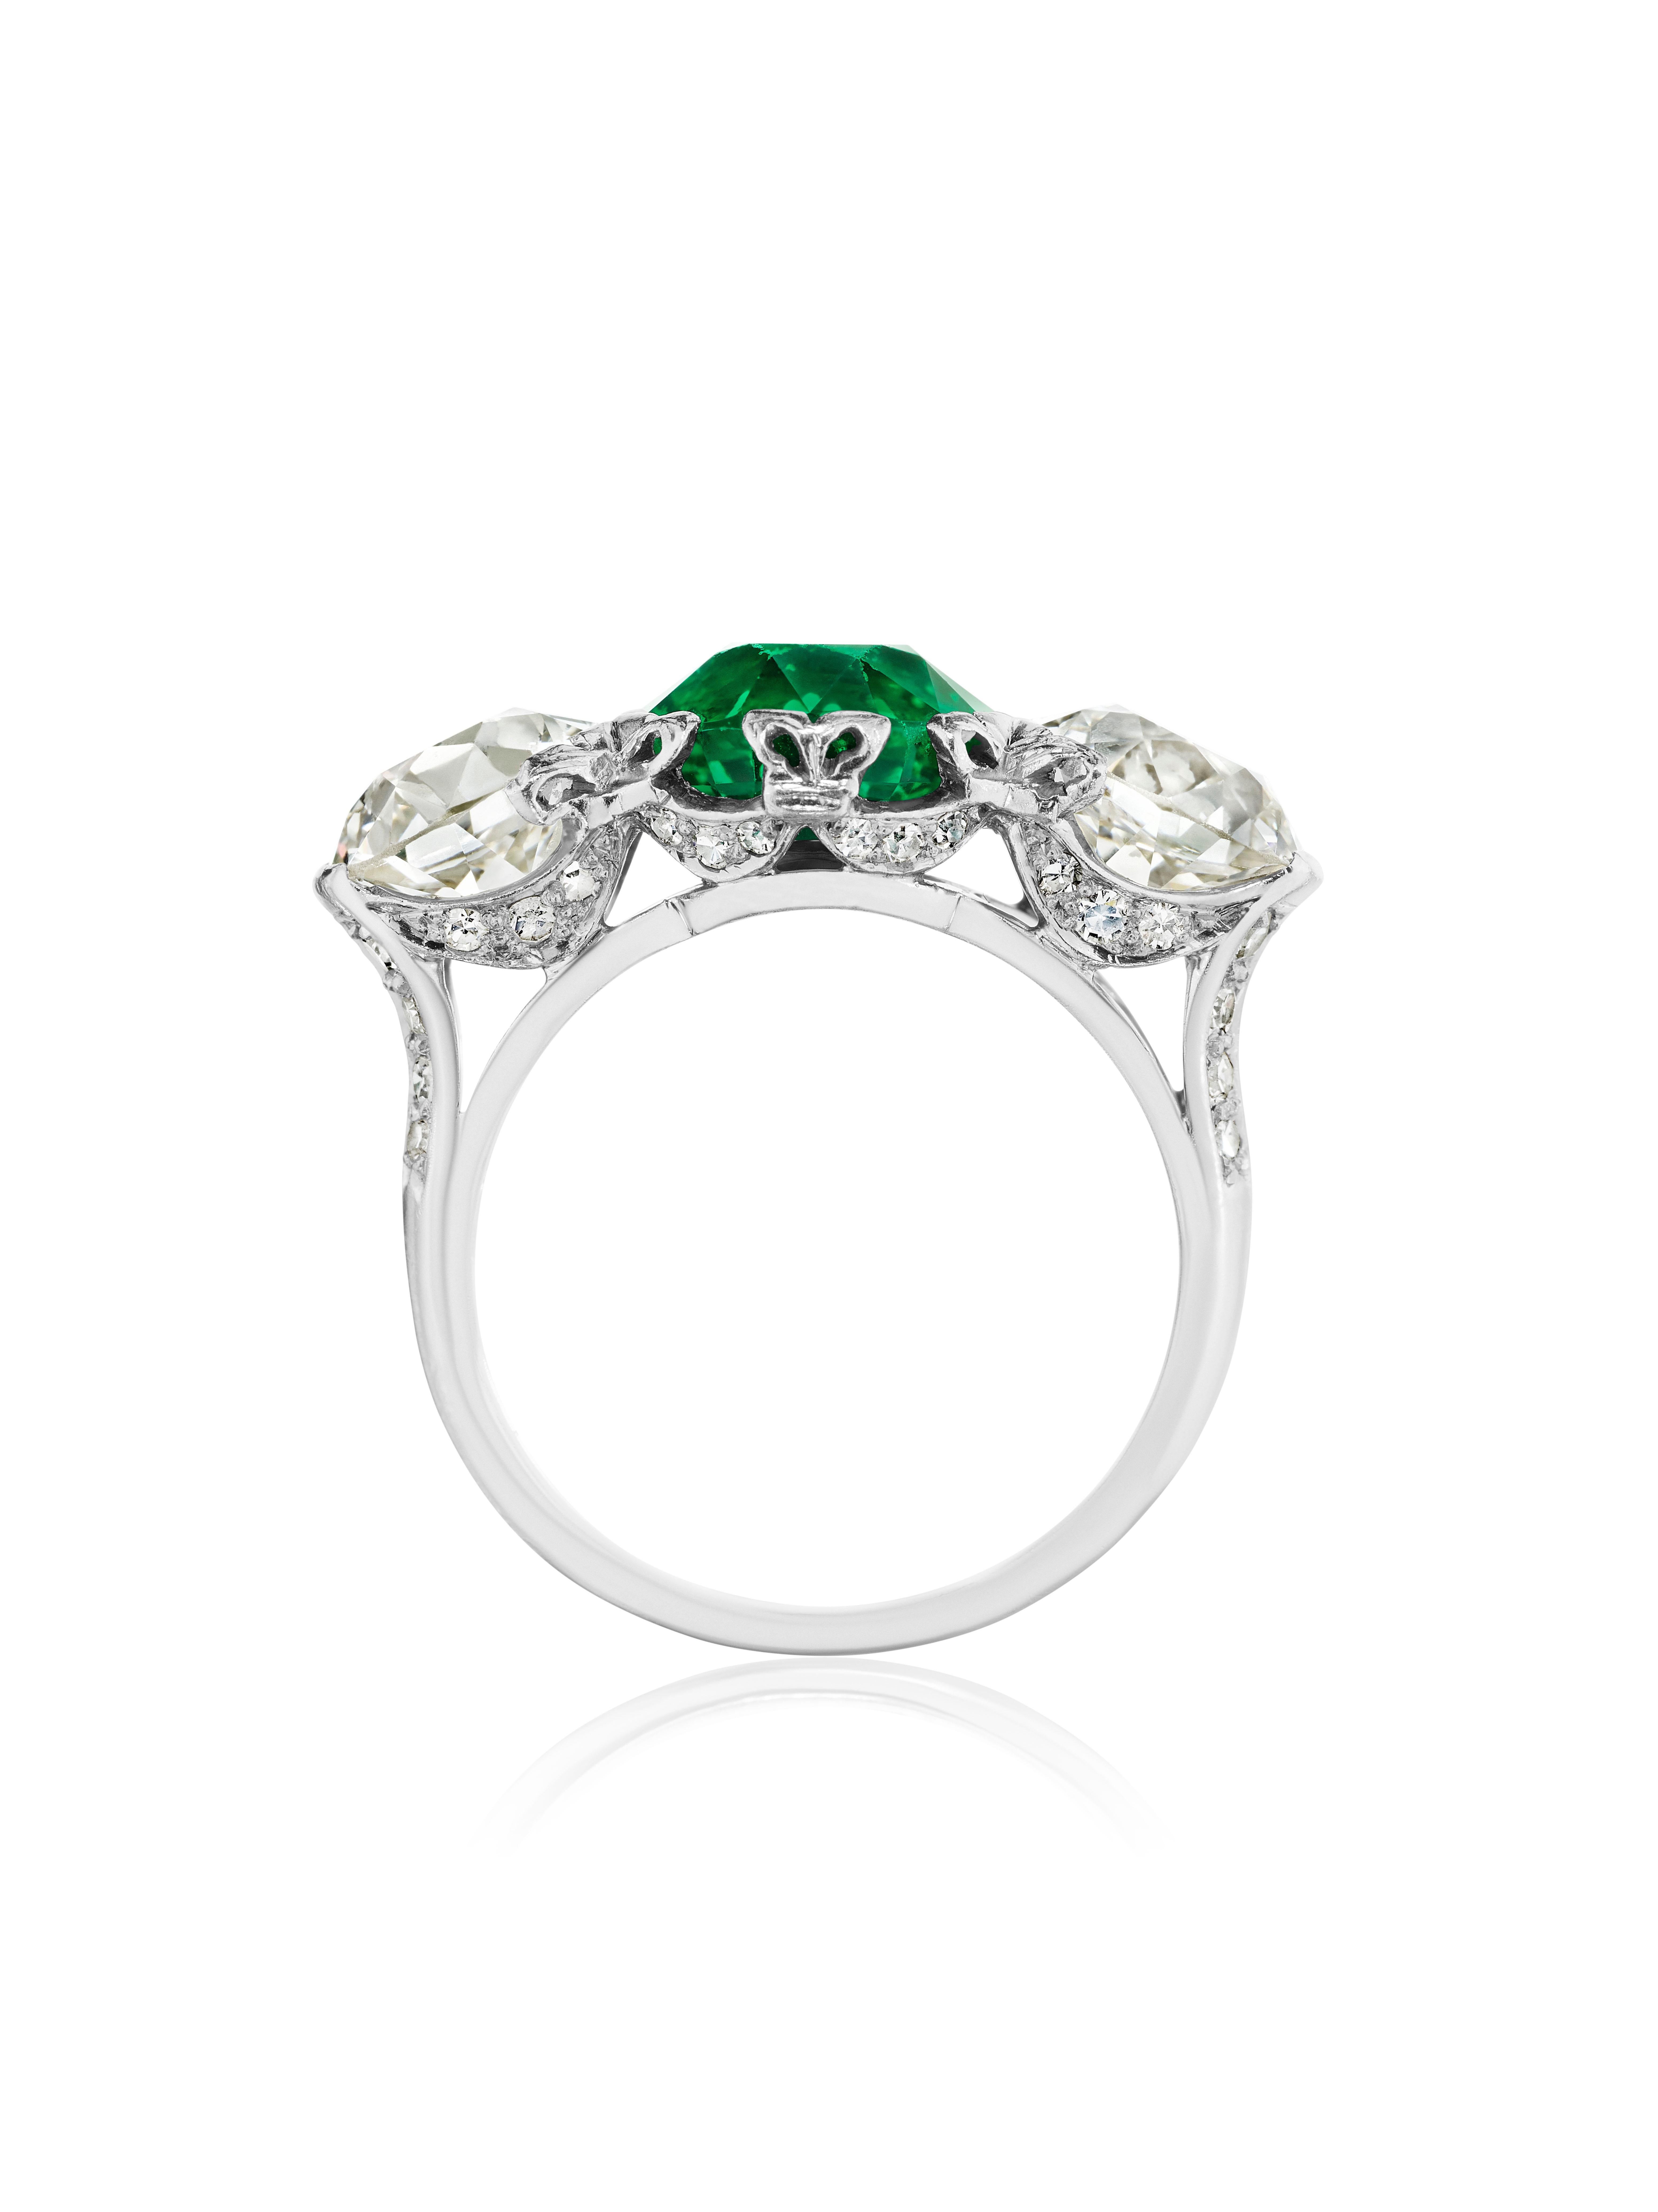 Ultra Rare Gubelin and GIA certified Natural Emerald and Diamond Ring.  3.38 Carat Emerald is brilliant-cut, Colombian origin.  Two round old European cut diamonds on the sides, 4.14 Carats (total weight).  Original, handmade setting in platinum